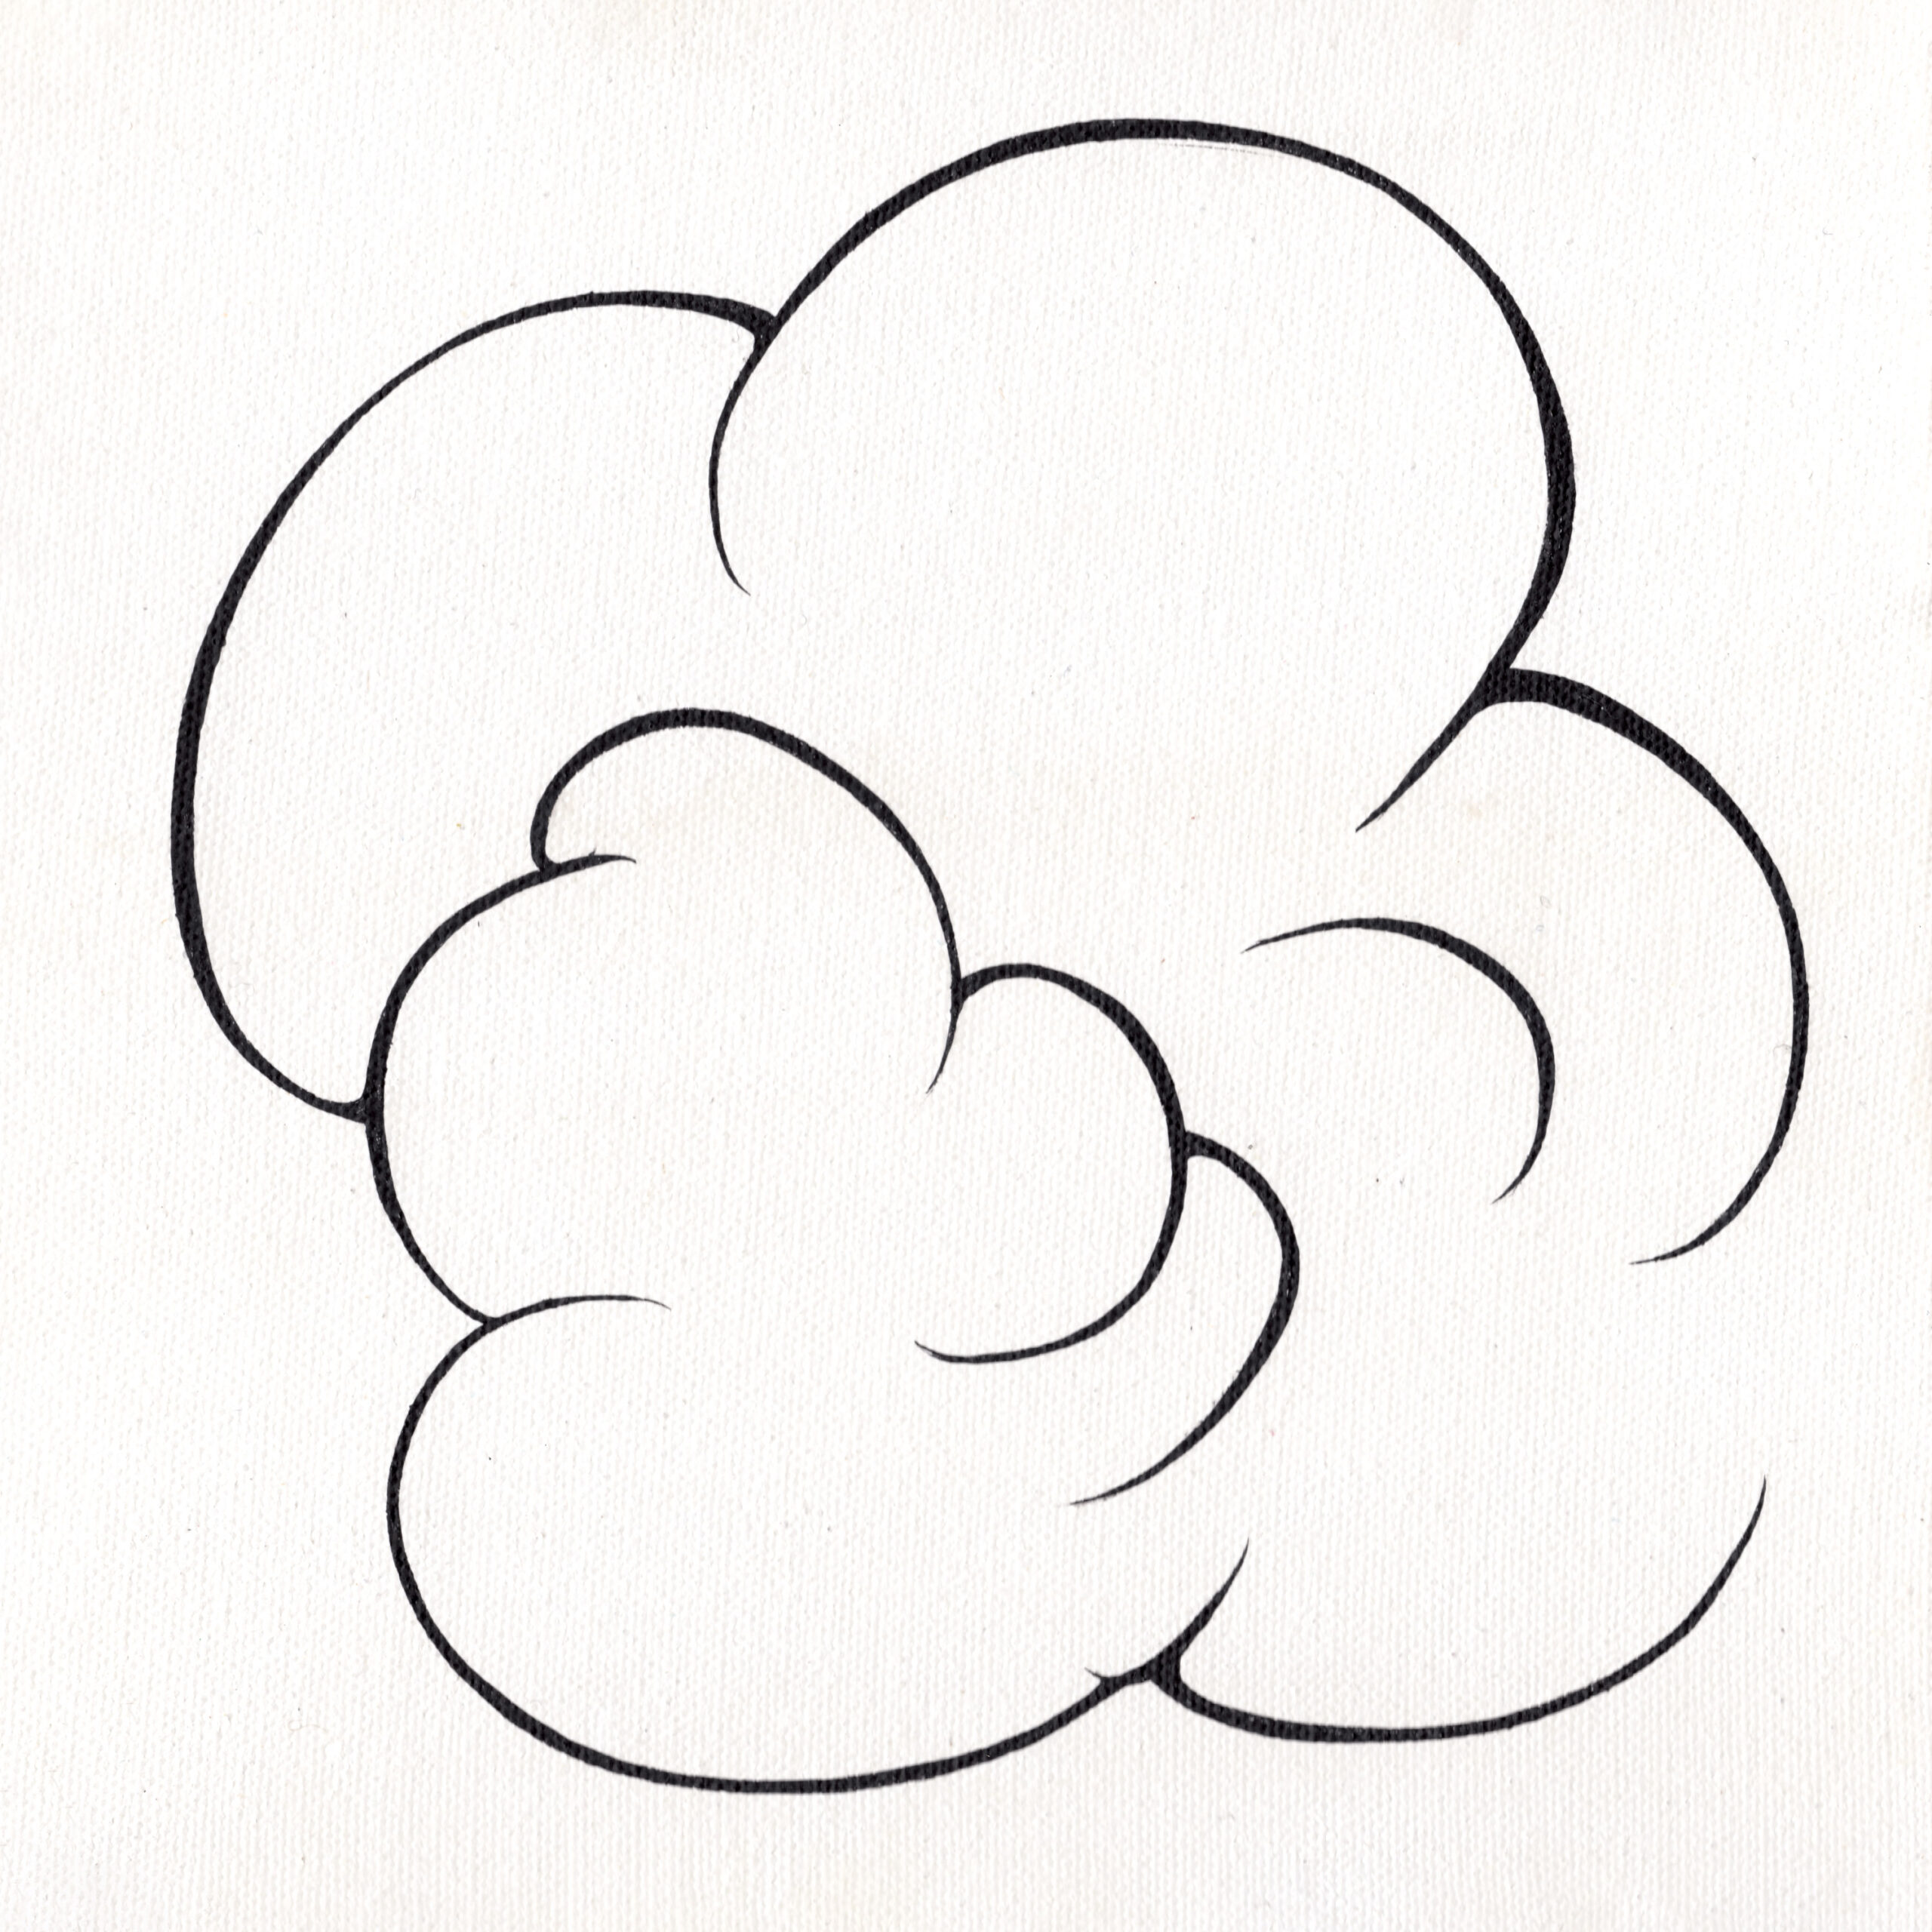 Cloud drawn byblack outlines on white canvas background.